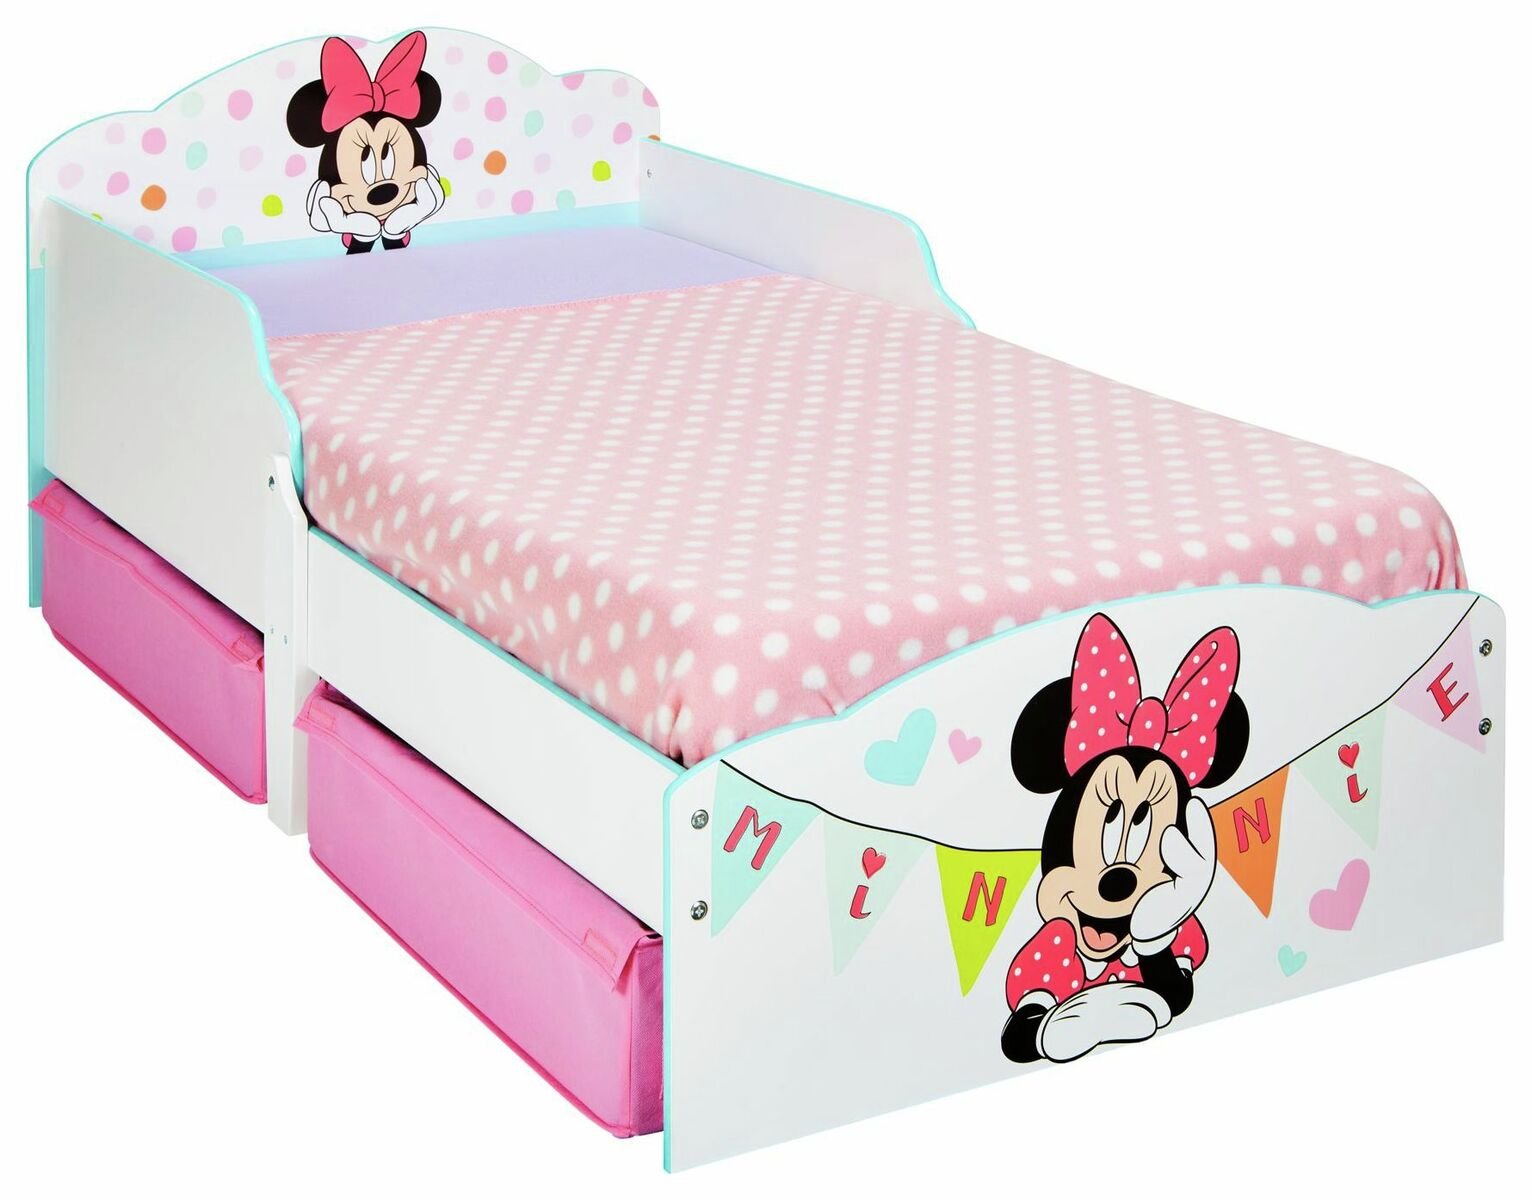 Minnie Mouse Toddler Bed with Drawers Review